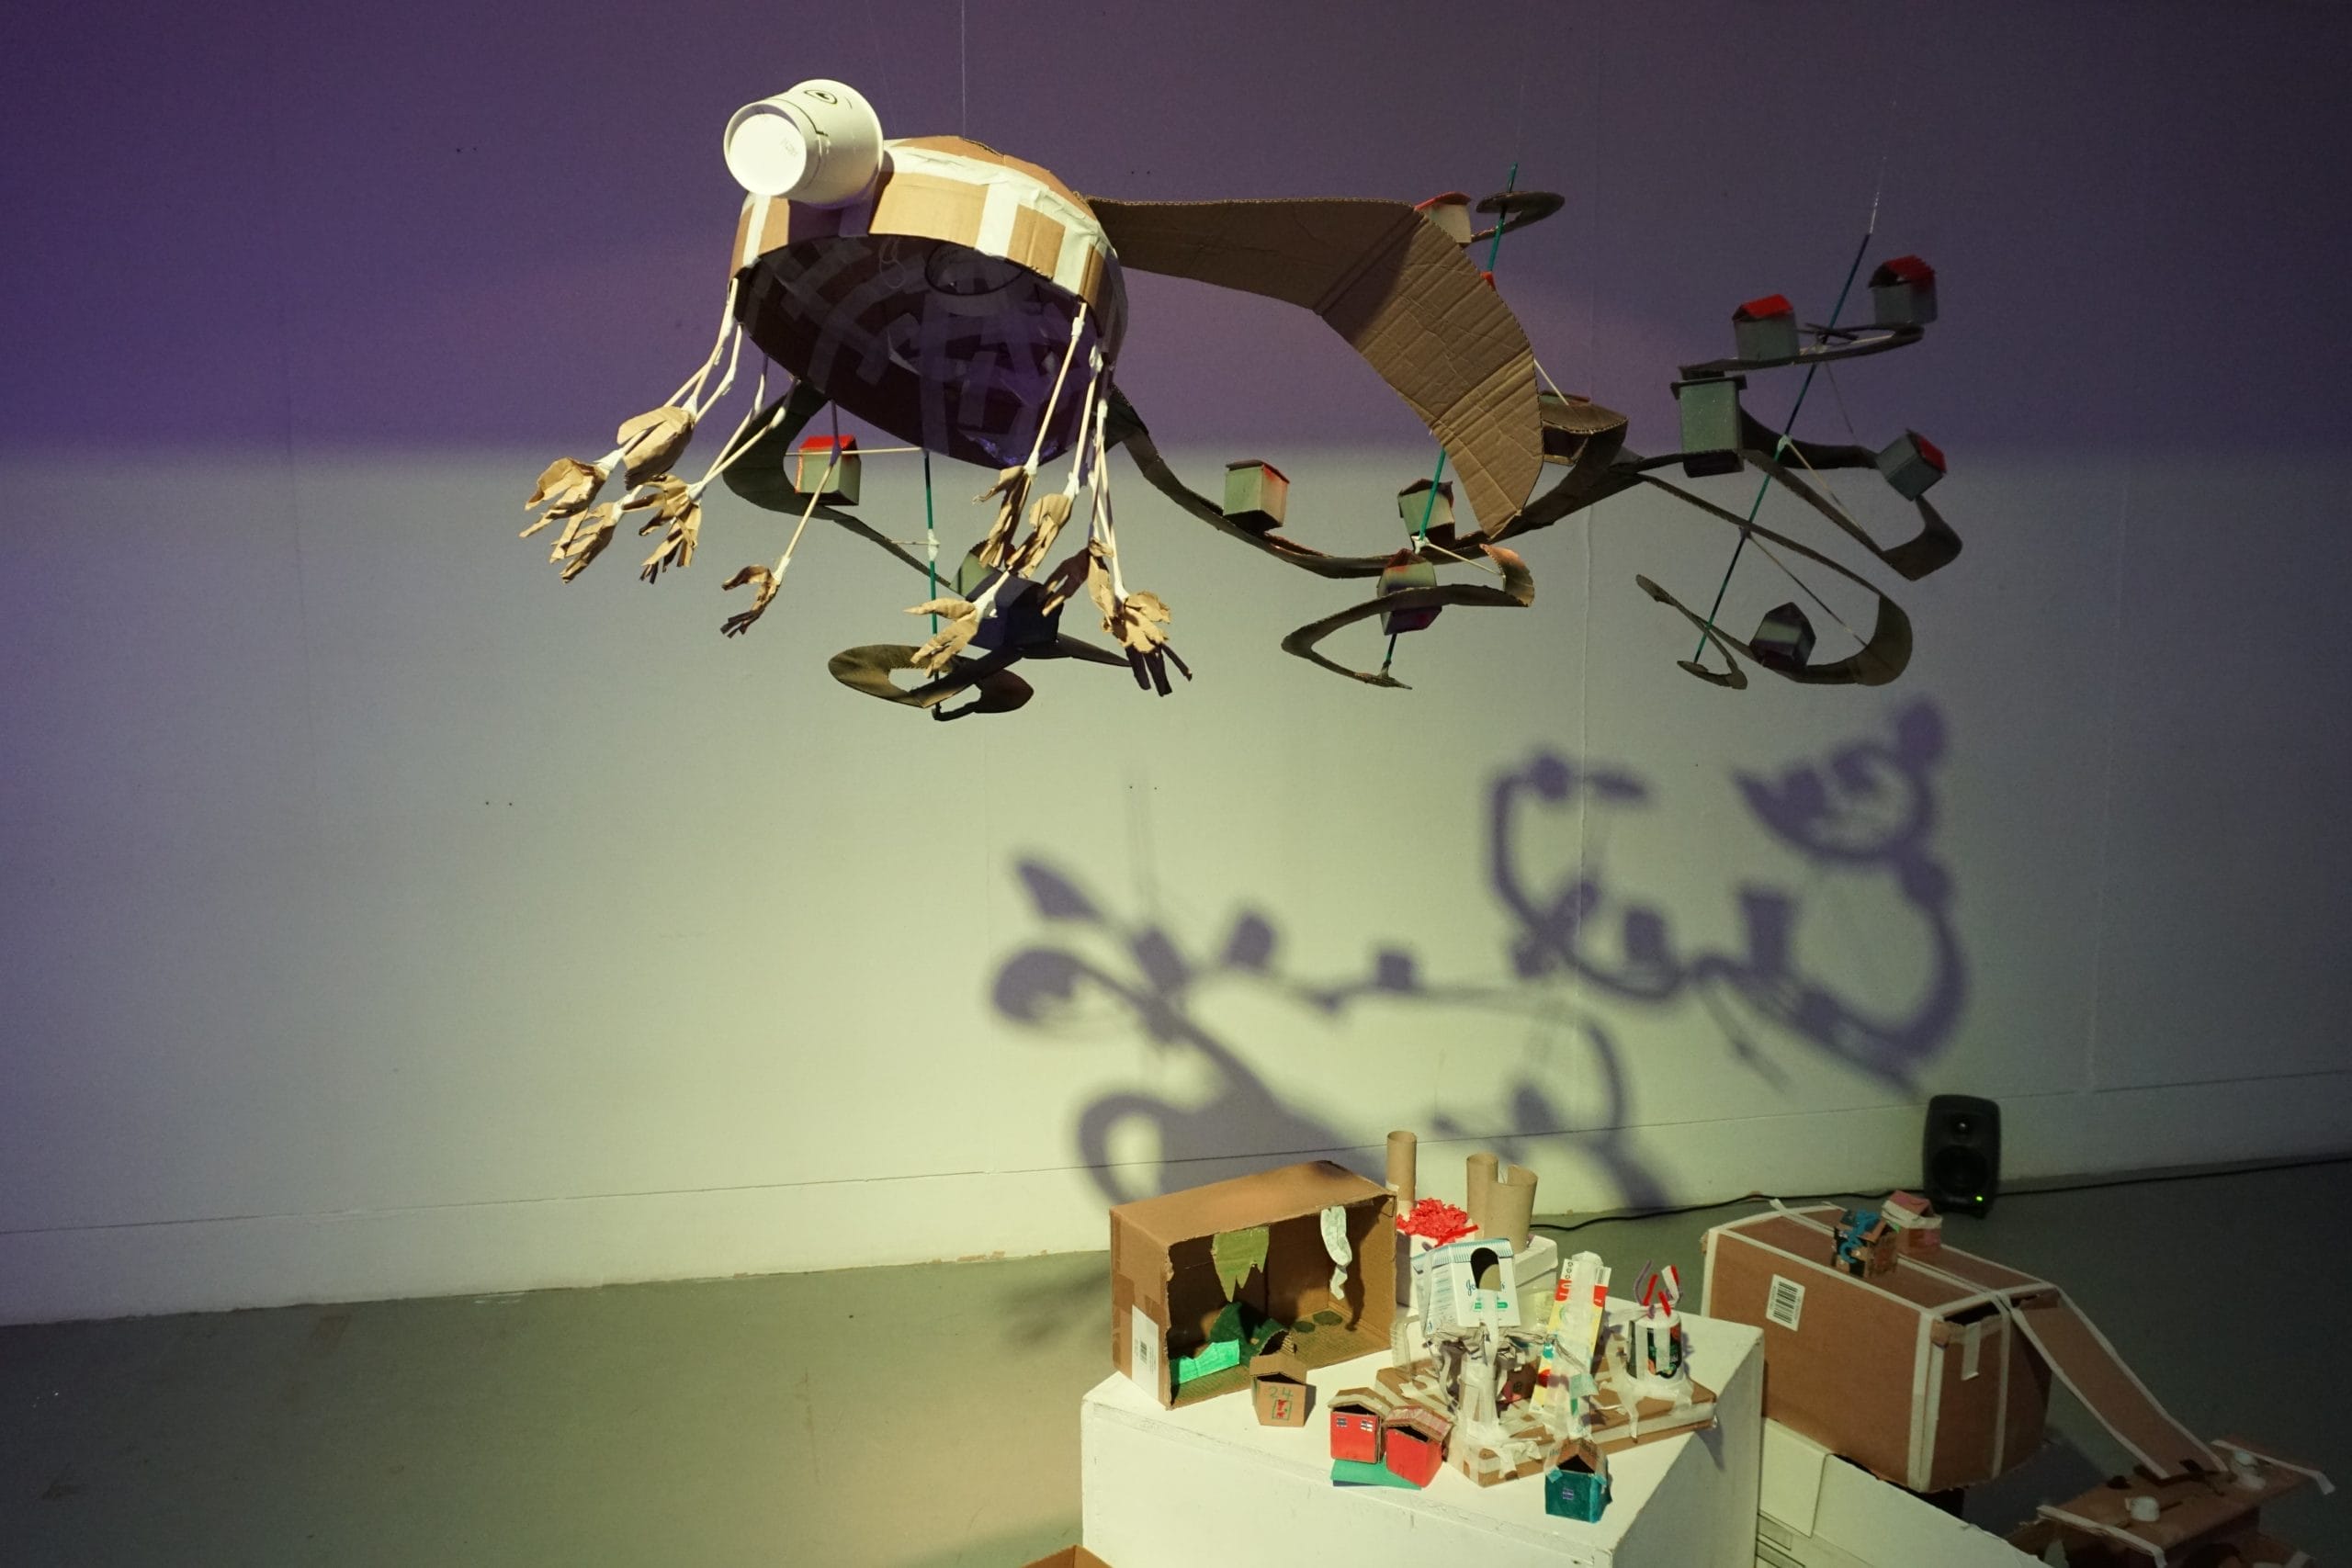 Cardboard houses and towns are constructed out of cardboard. Above them a large cardboard turtle-dragon is hung from the ceiling, decorated with other sustainable materials. The objects cause whimsical shadows to appear on the wall.